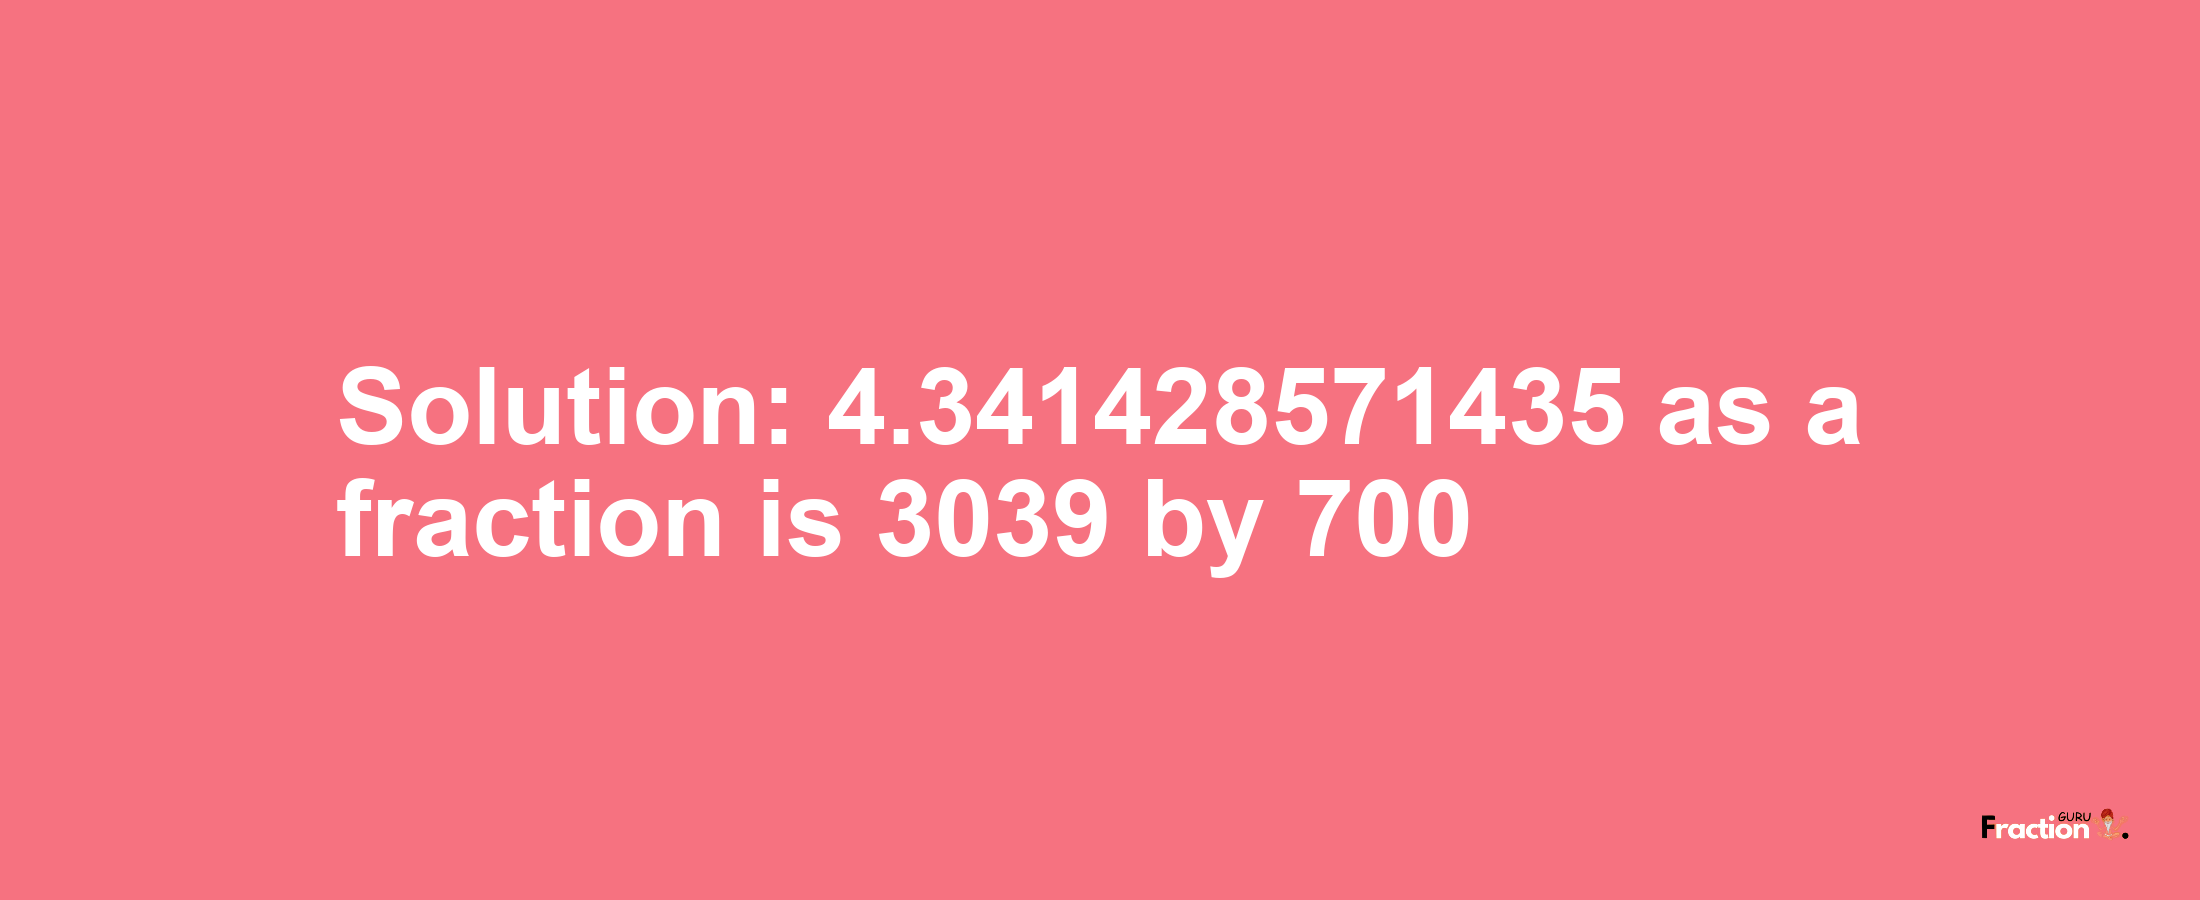 Solution:4.341428571435 as a fraction is 3039/700